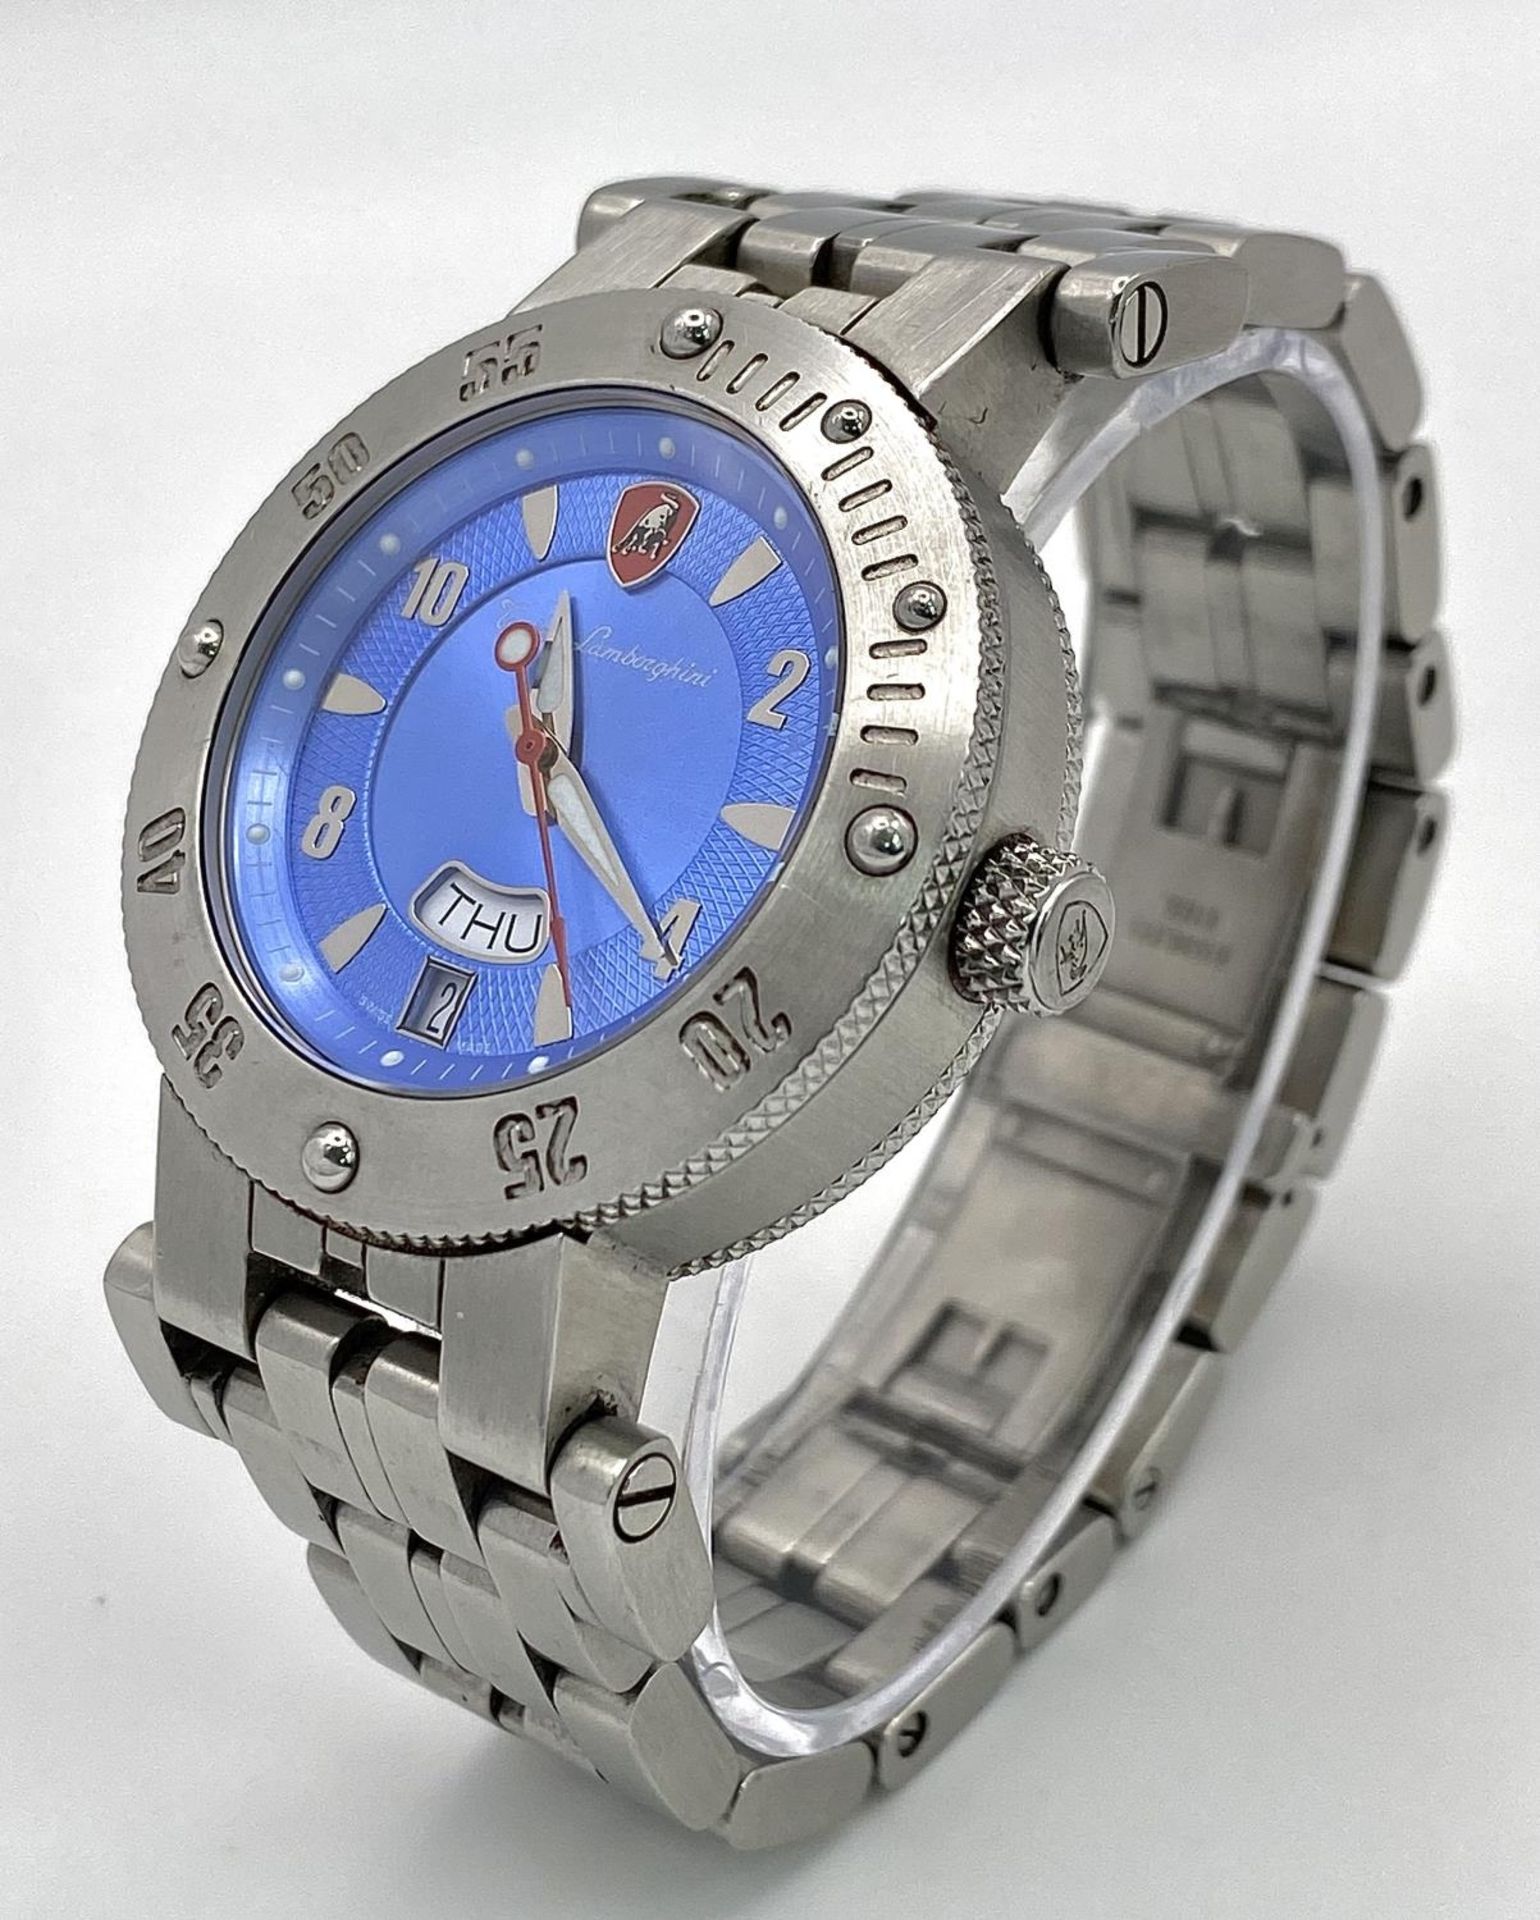 A Lamborghini Automatic Gents Watch. Stainless steel bracelet and case - 38mm. Blue dial with day/